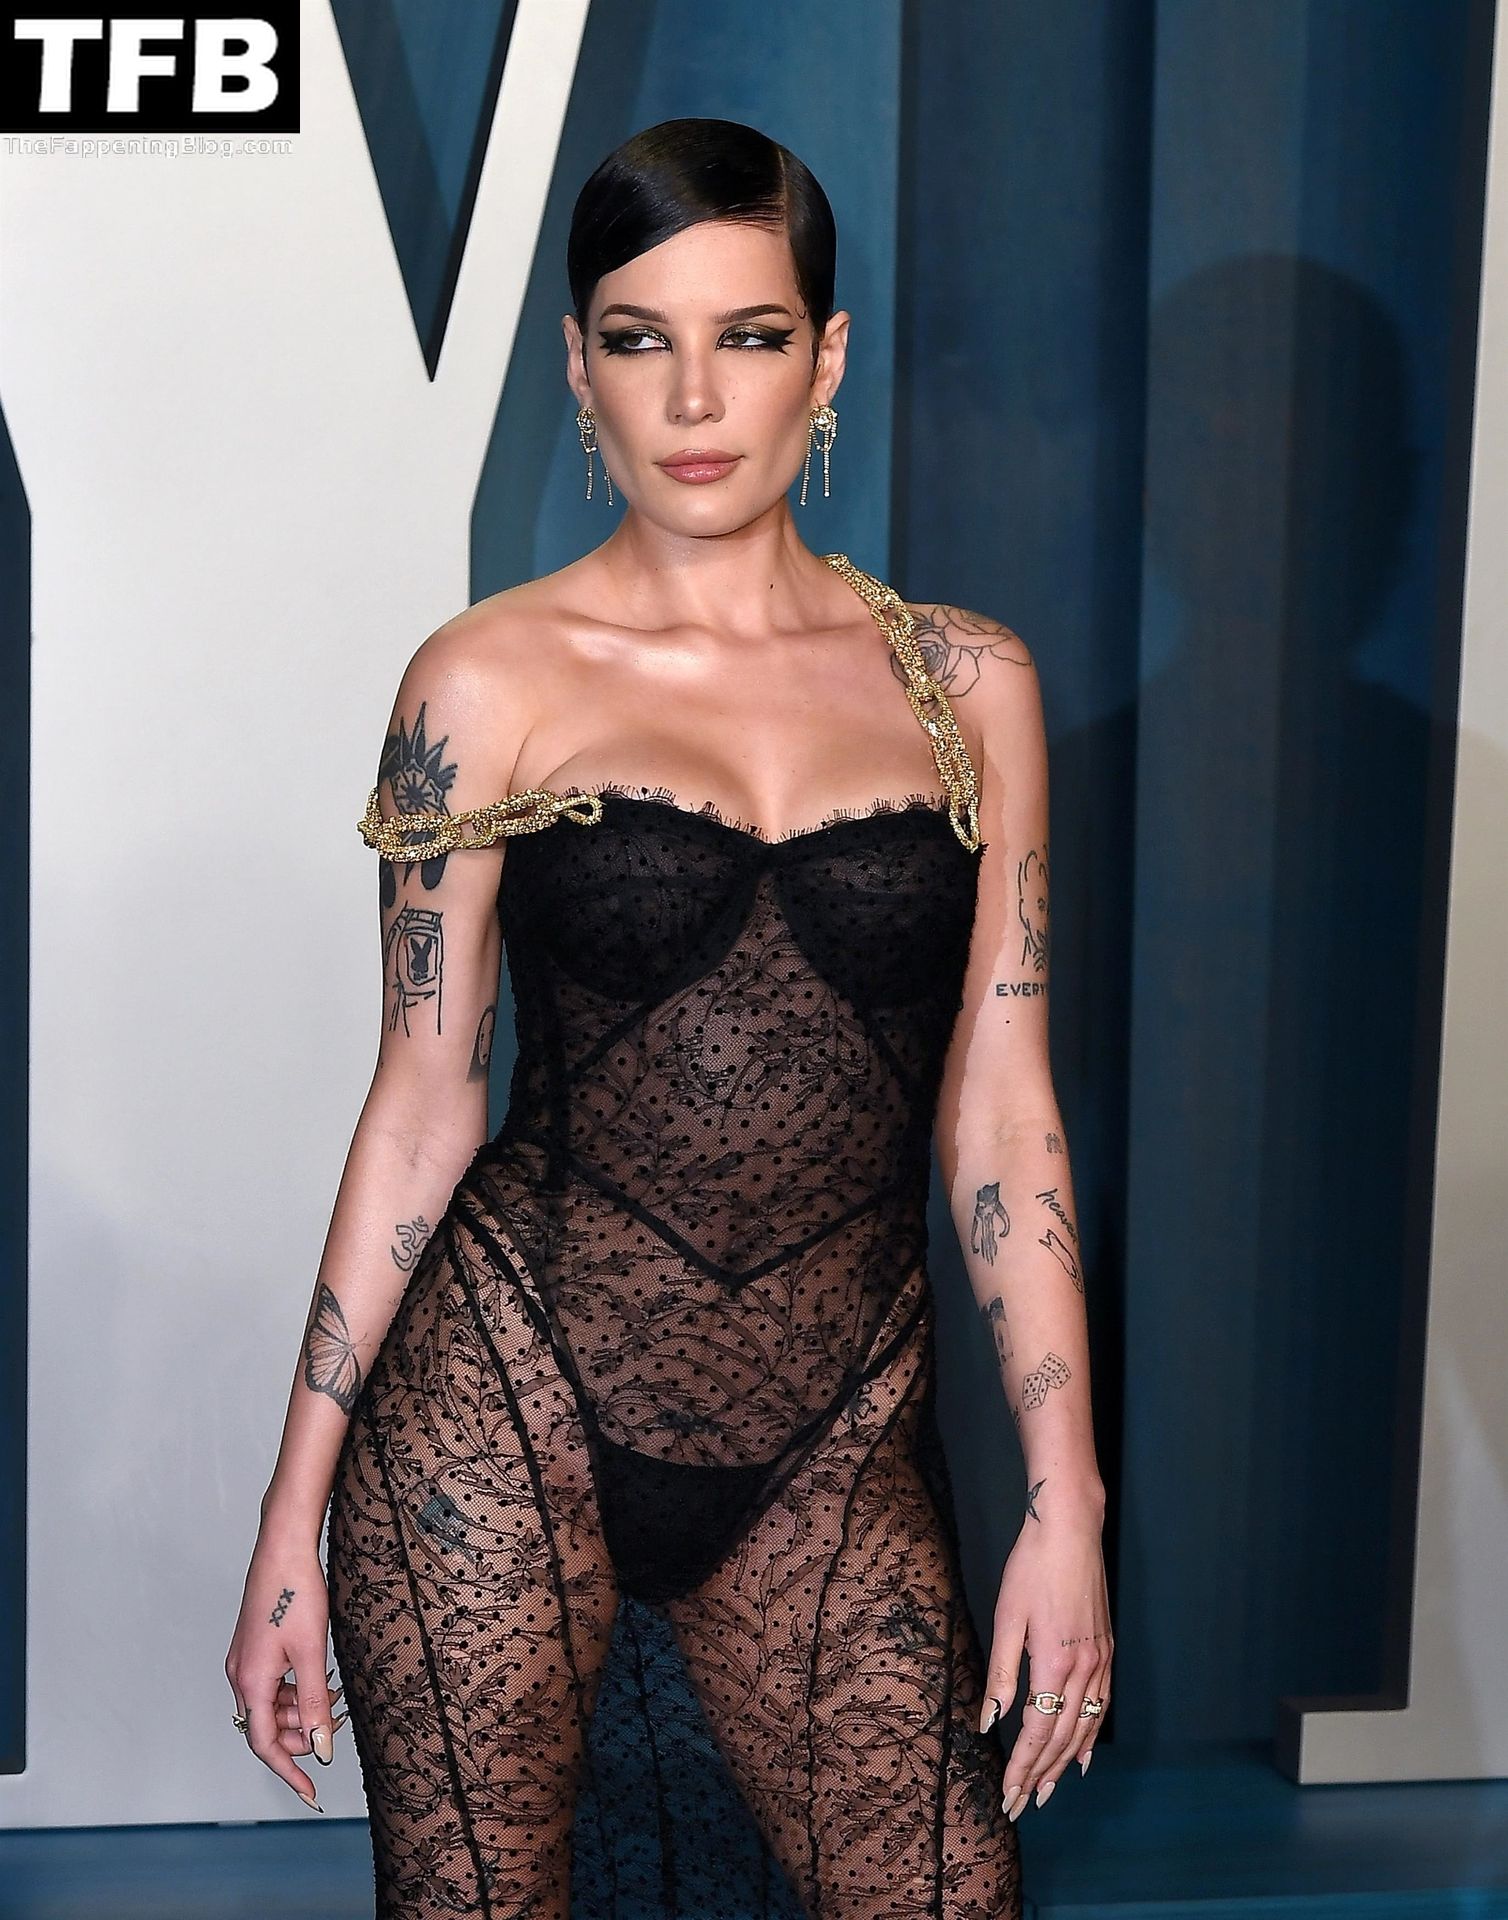 Halsey-Sexy-The-Fappening-Blog-5-2.jpg